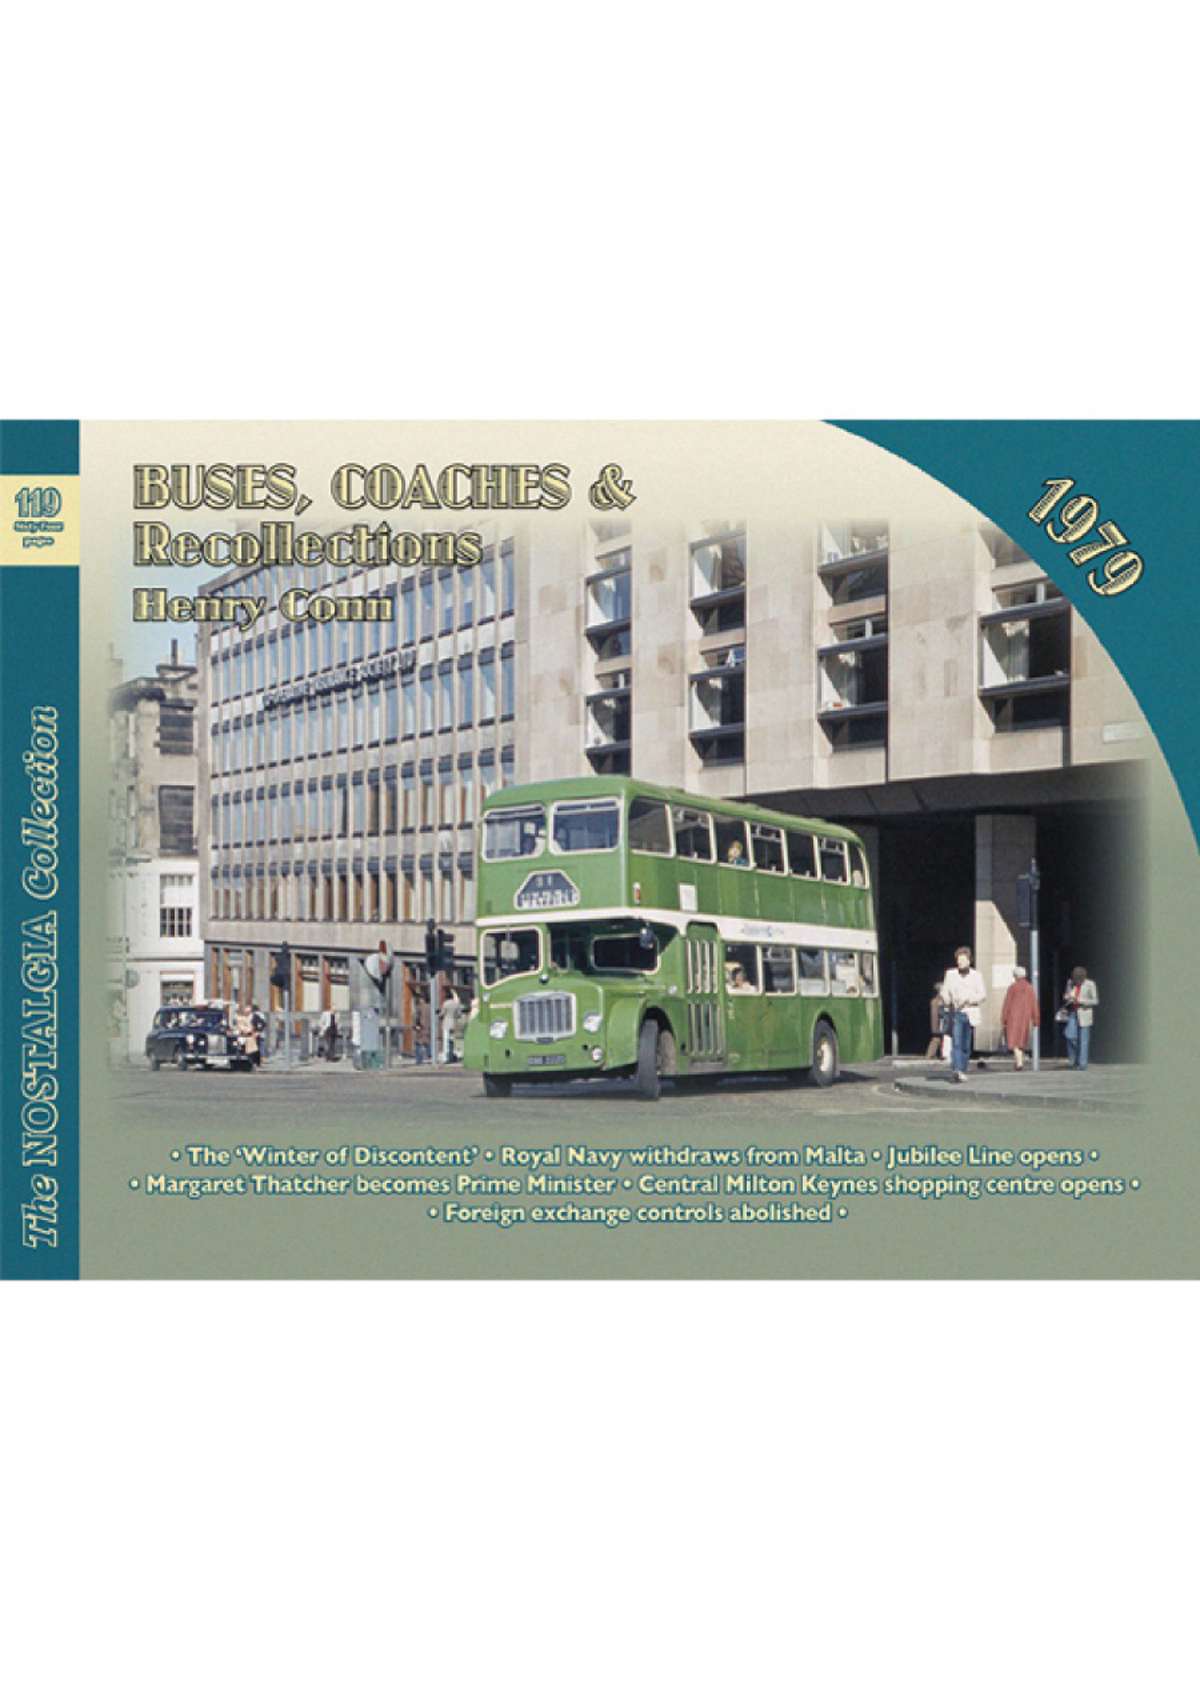 5744 - Buses, Coaches And Recollections:1979